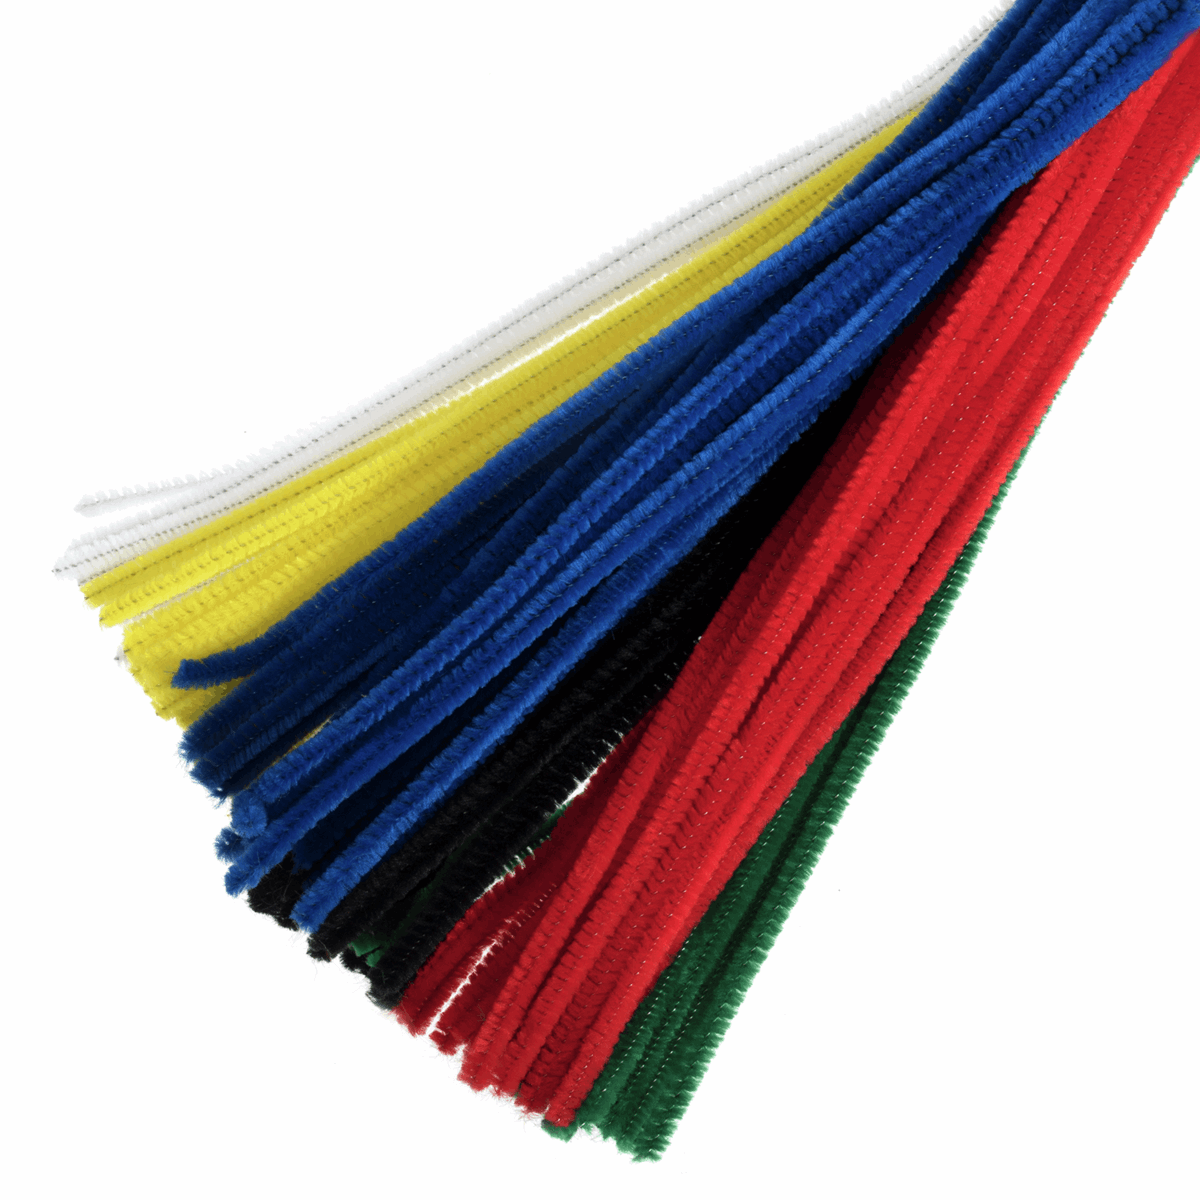 Multi Coloured Pipe Cleaners - 15cm x 4mm (Pack of 20)